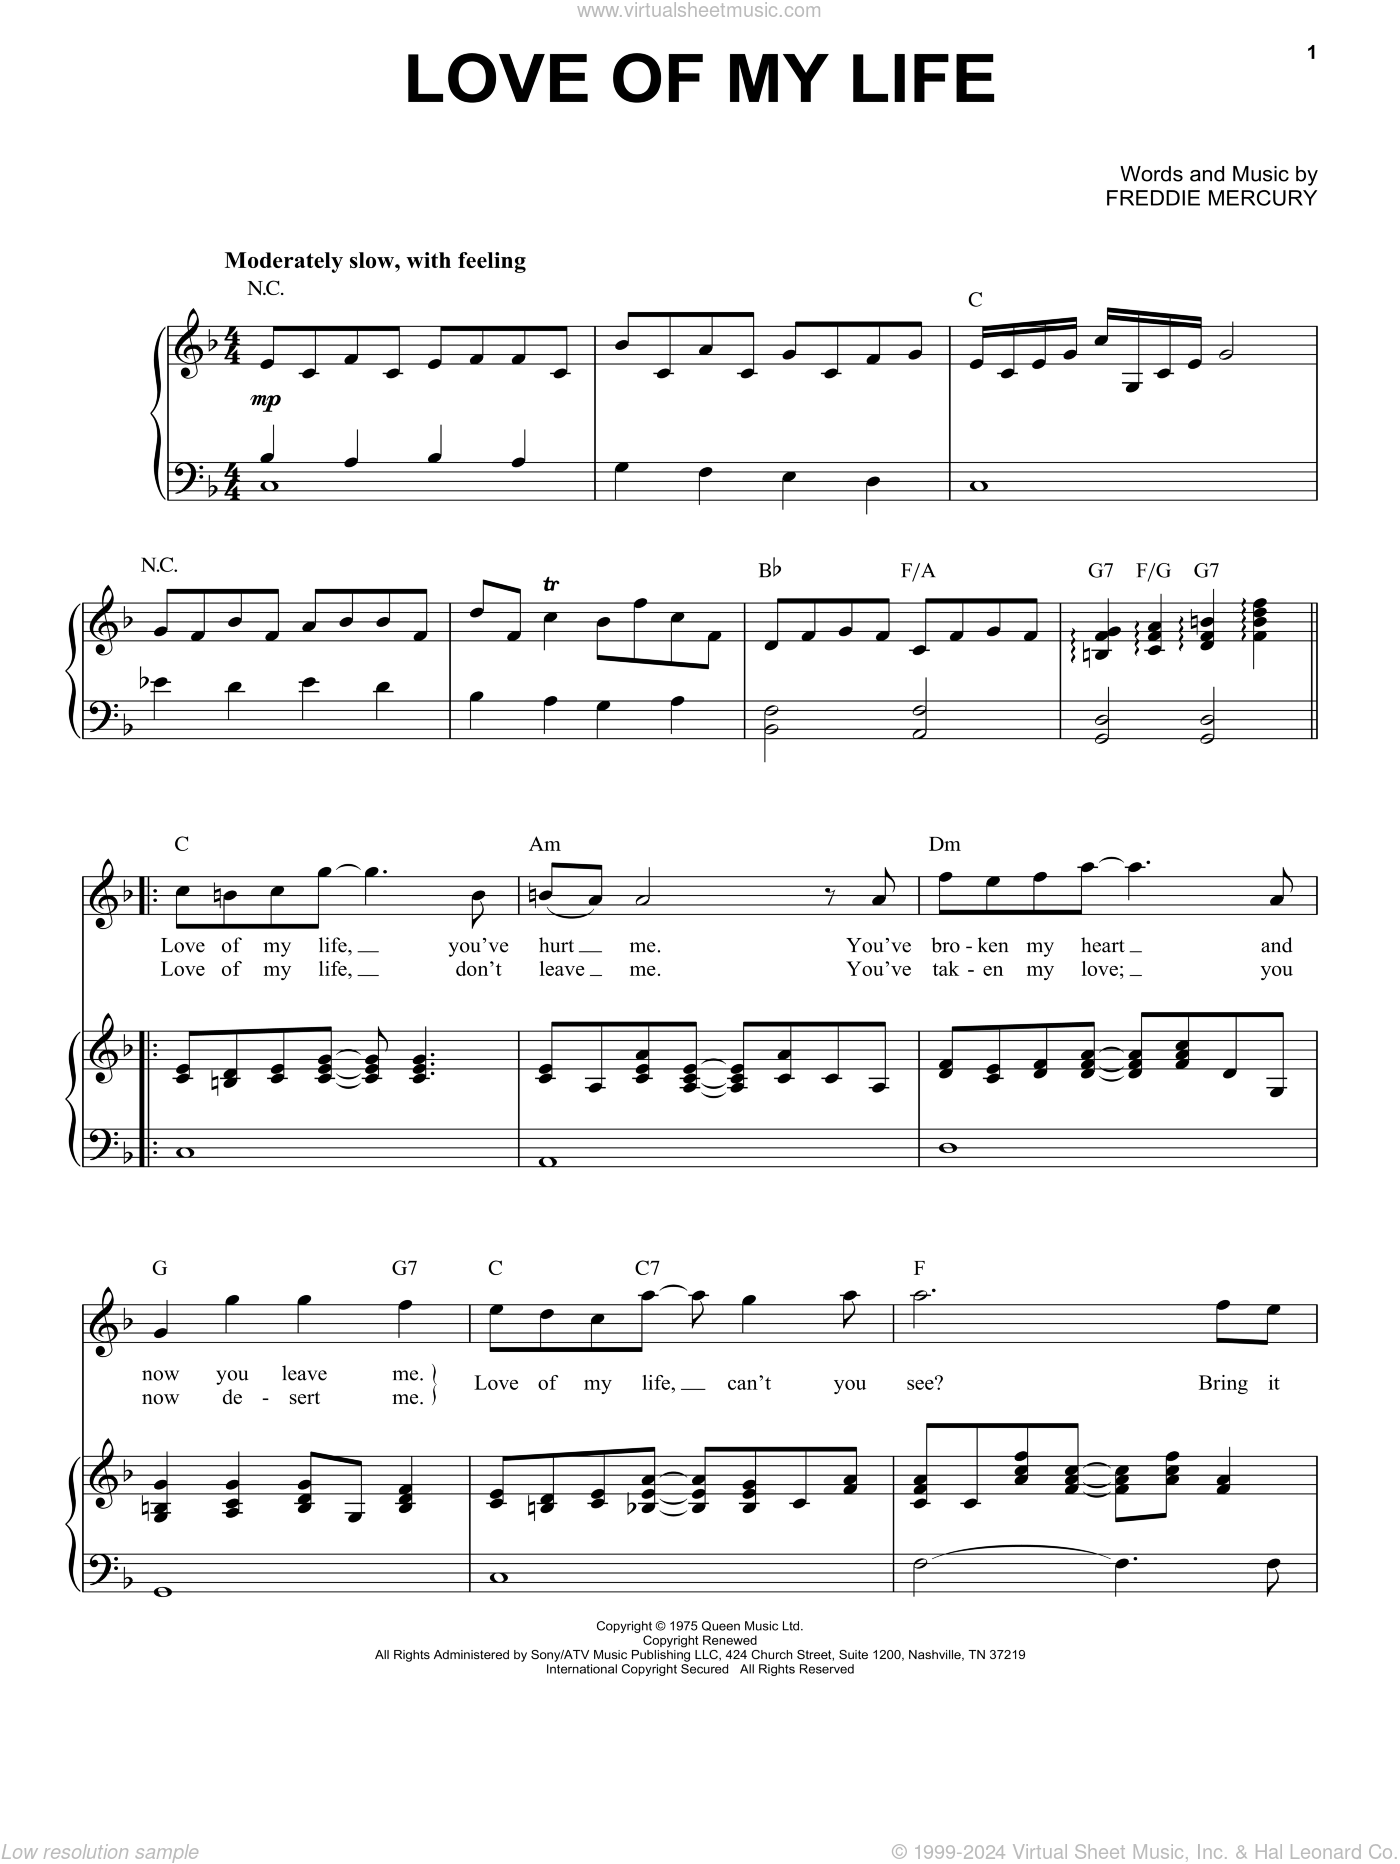 Queen: Love Of My Life sheet music for voice and piano (PDF)